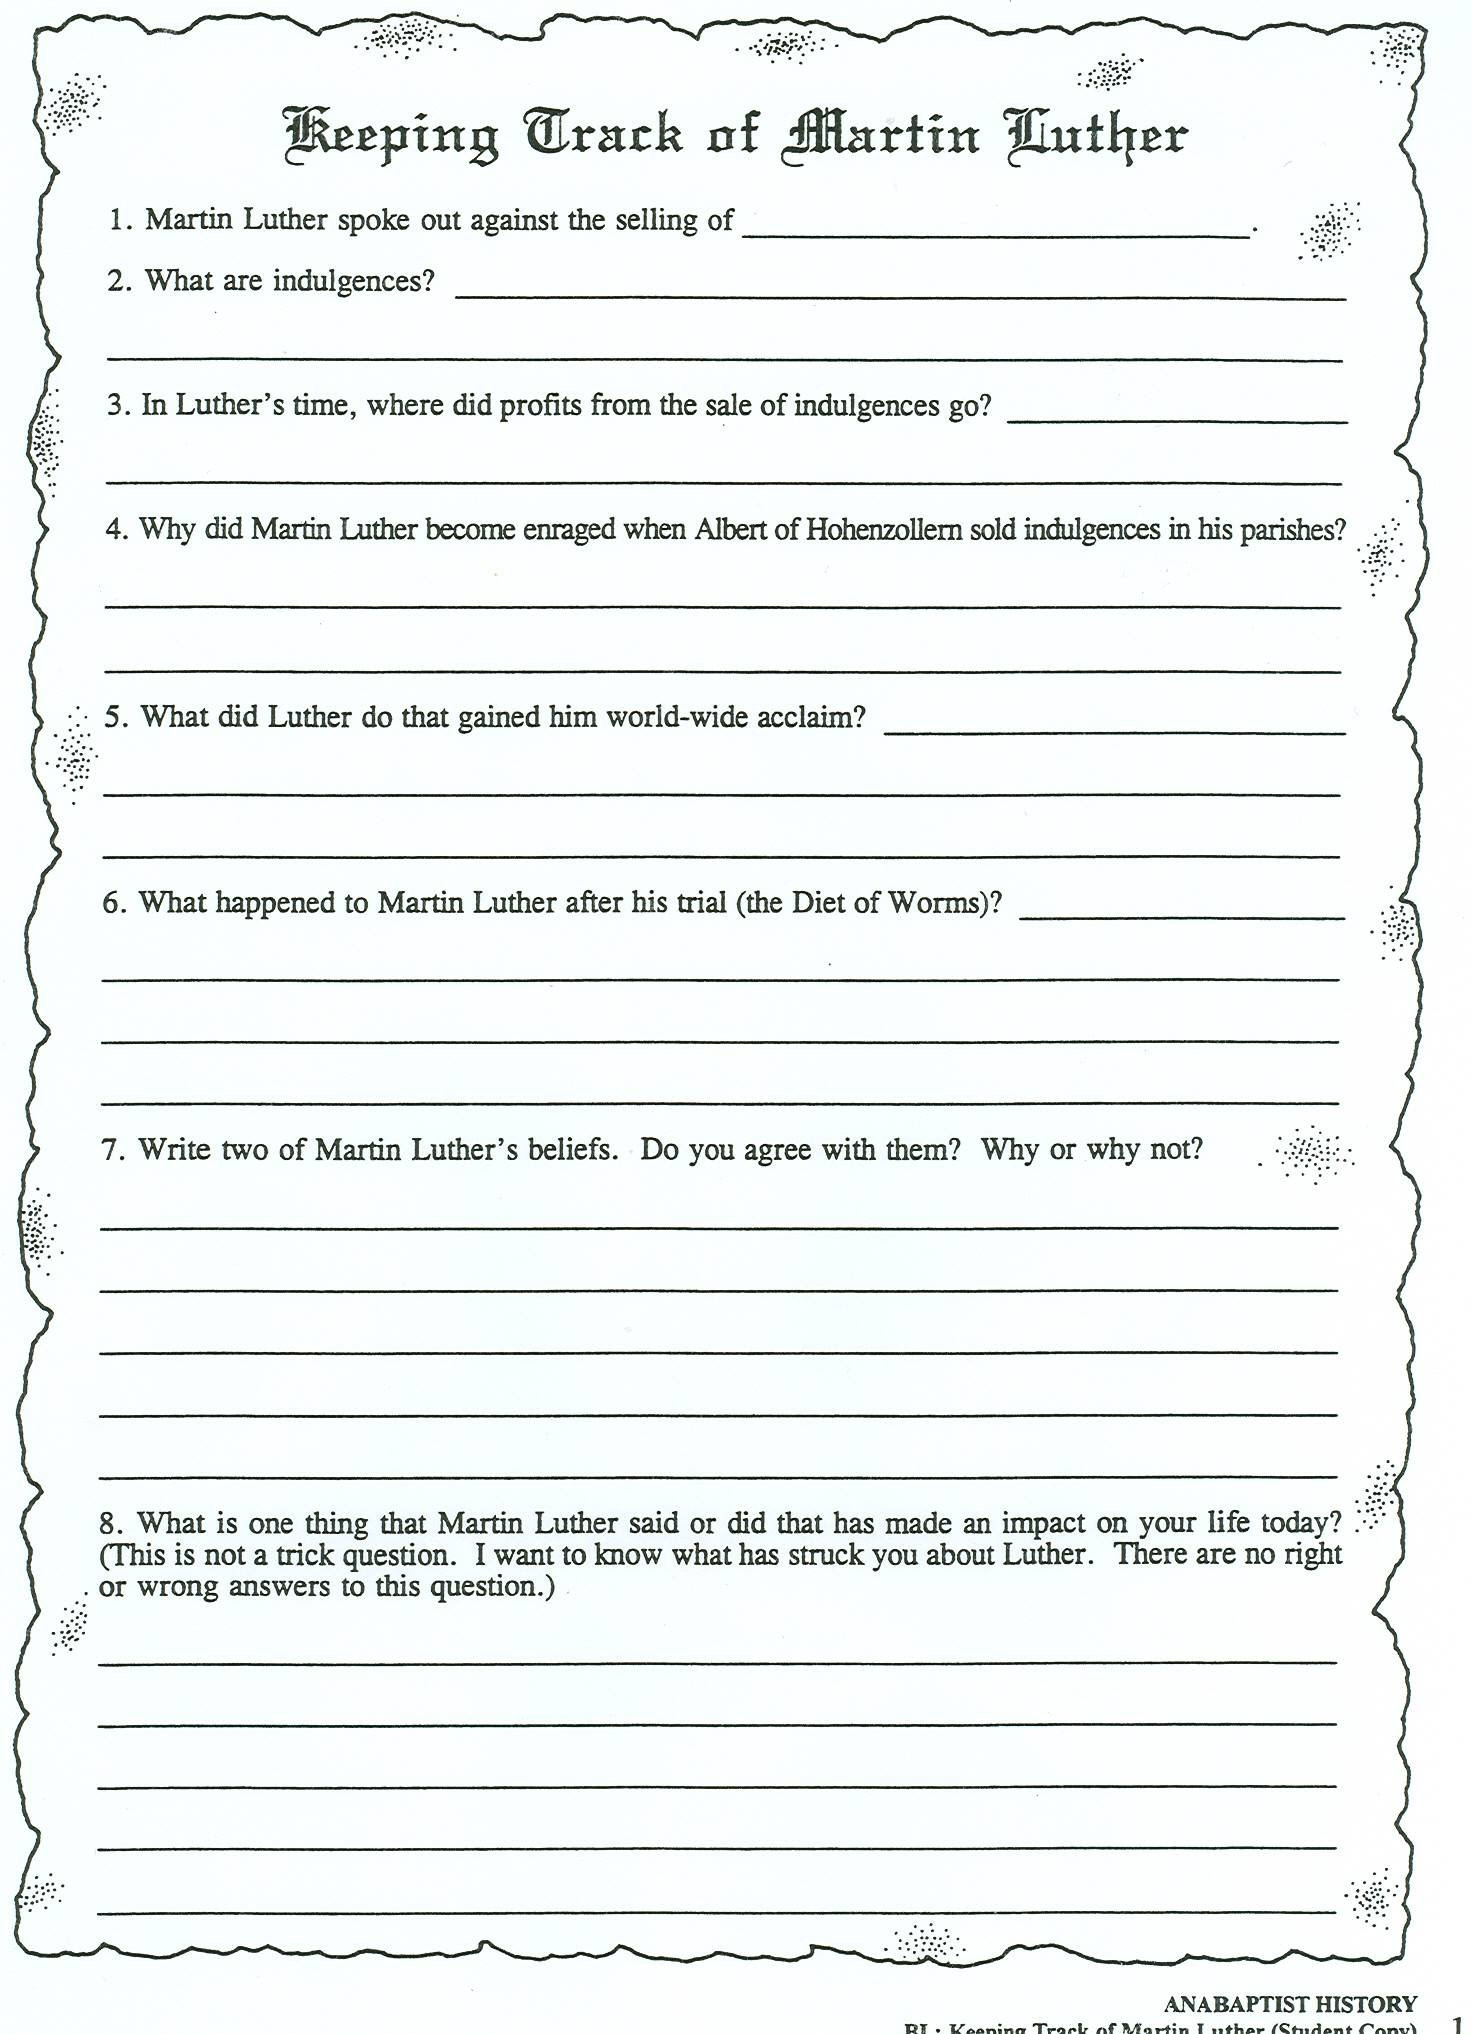 Protestant Reformation Worksheet Answers the Protestant Reformation Worksheet Answers